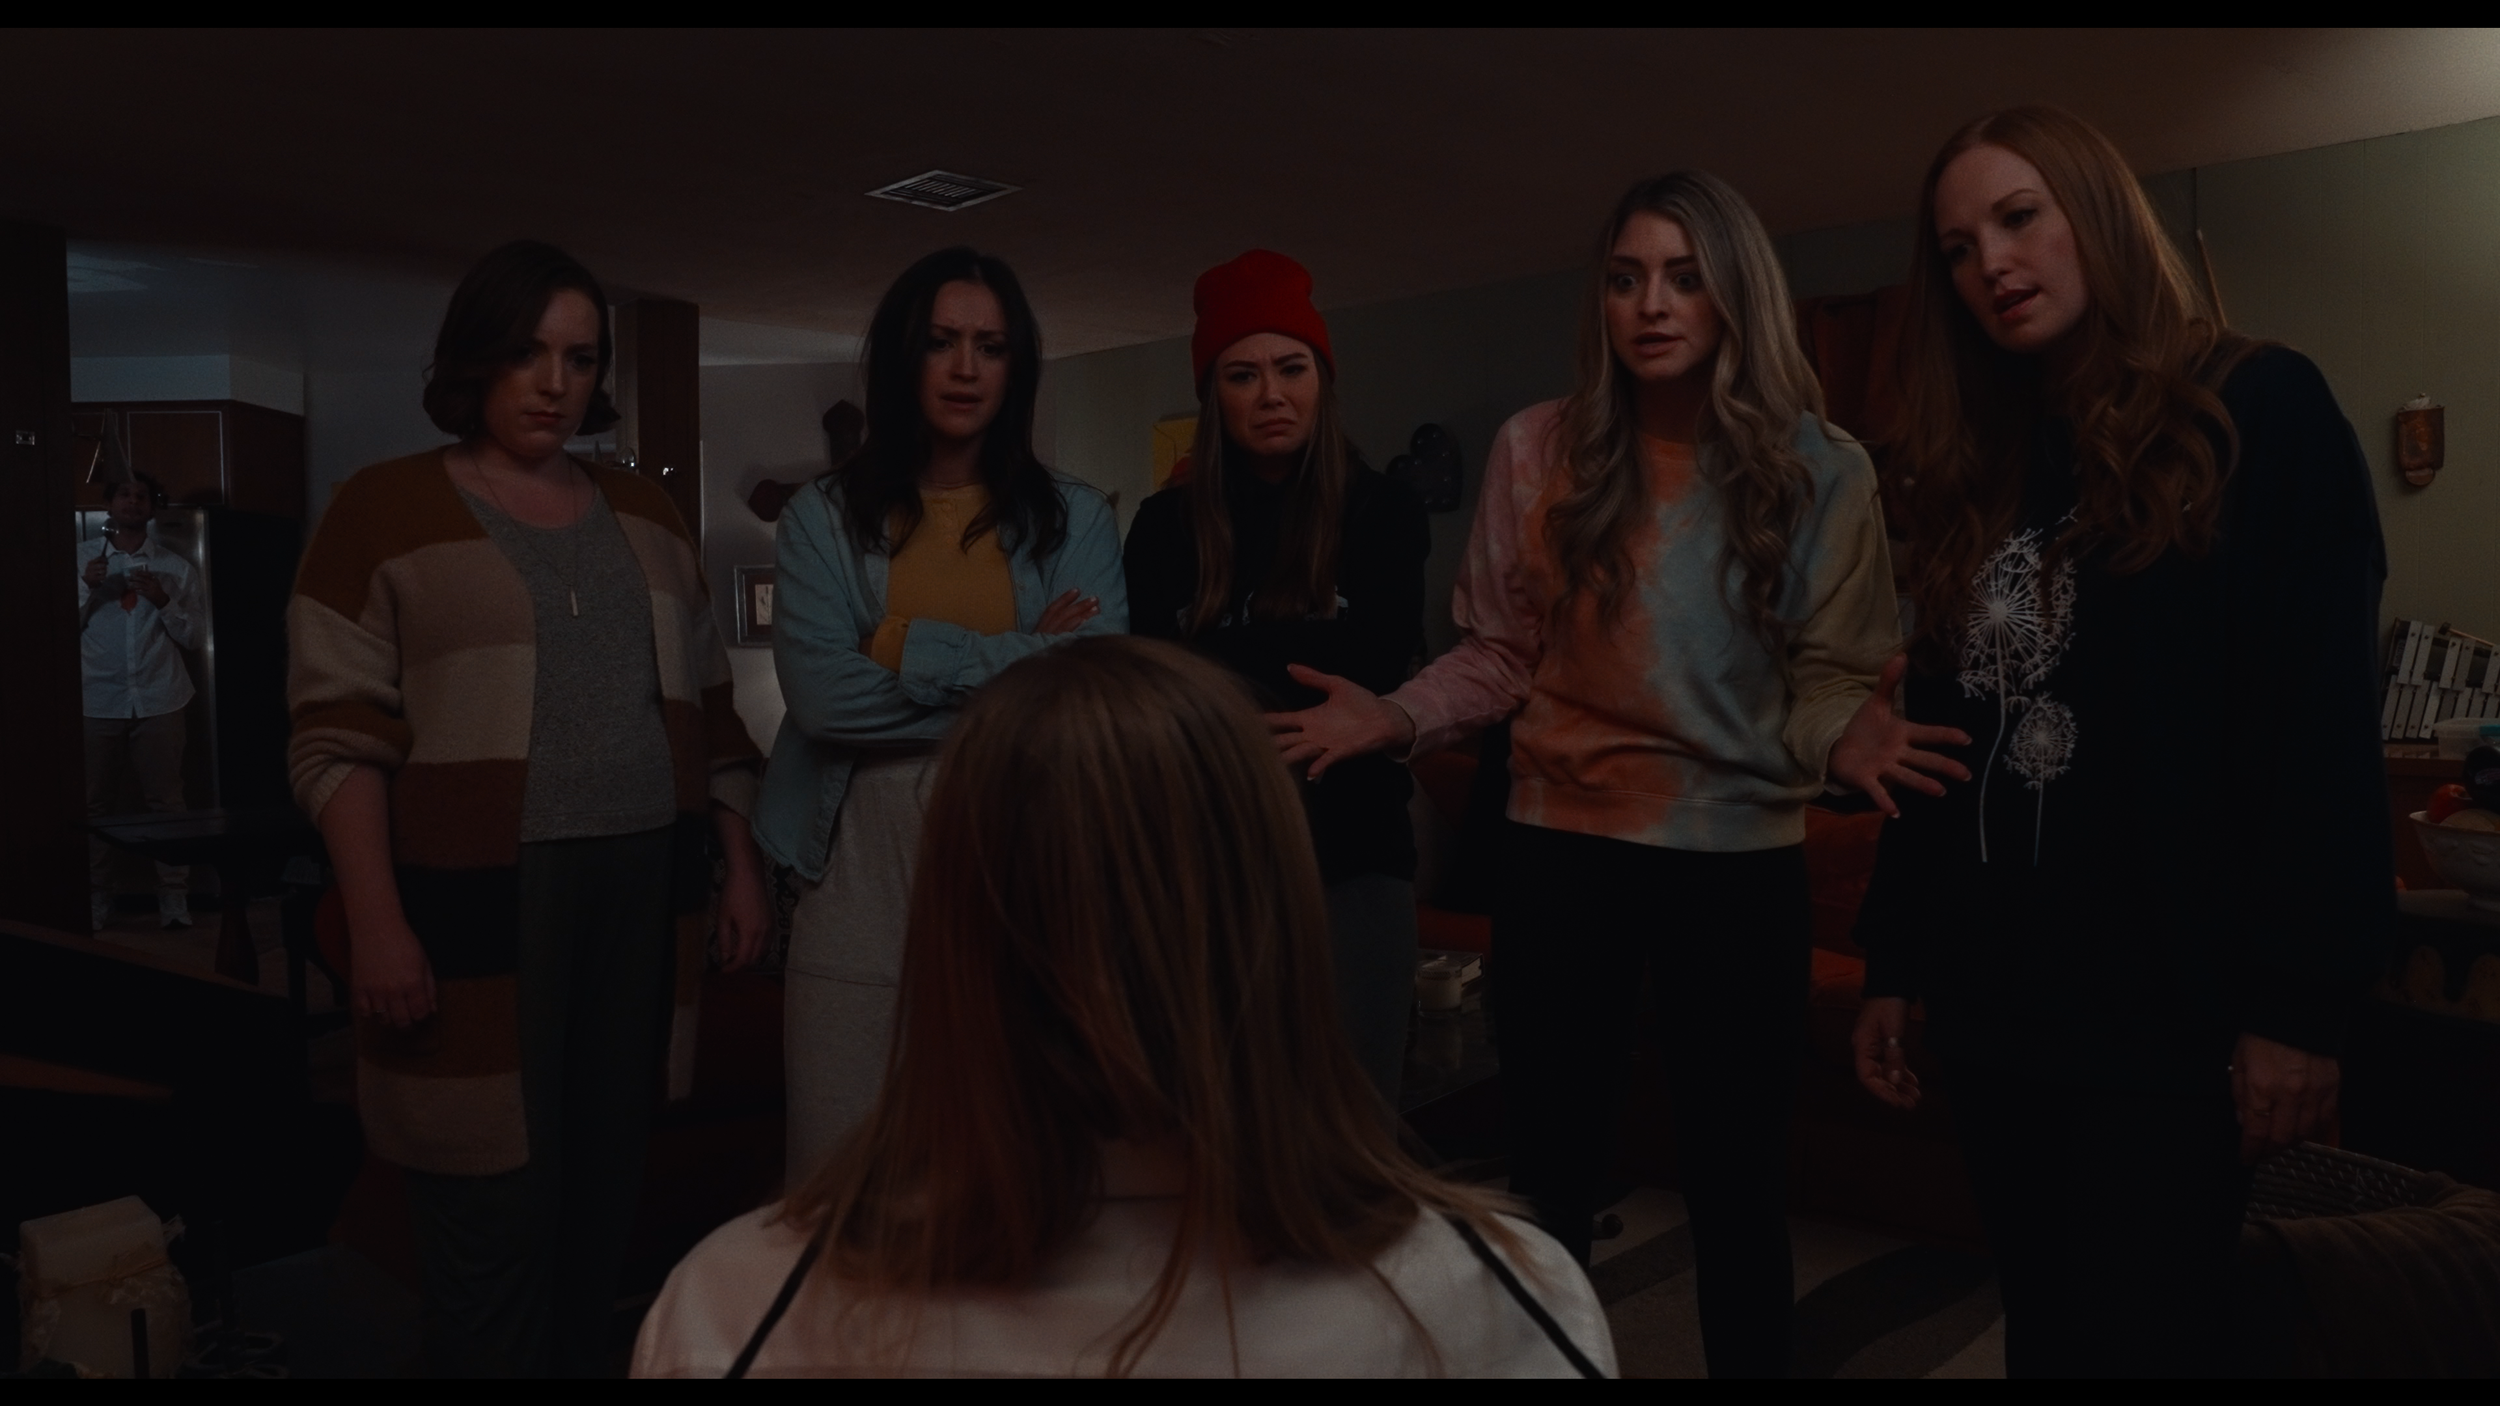 Rochelle Anderson(Gillian)_Harley Bronwyn(Avery)_Mandie Cheung(Dylan)_Geri Courtney-Austein(Marybeth)_Claire Dellamar(Nora)_Brian Flaccus(Jeremiah)_Girls Interogate Jeremiah.png